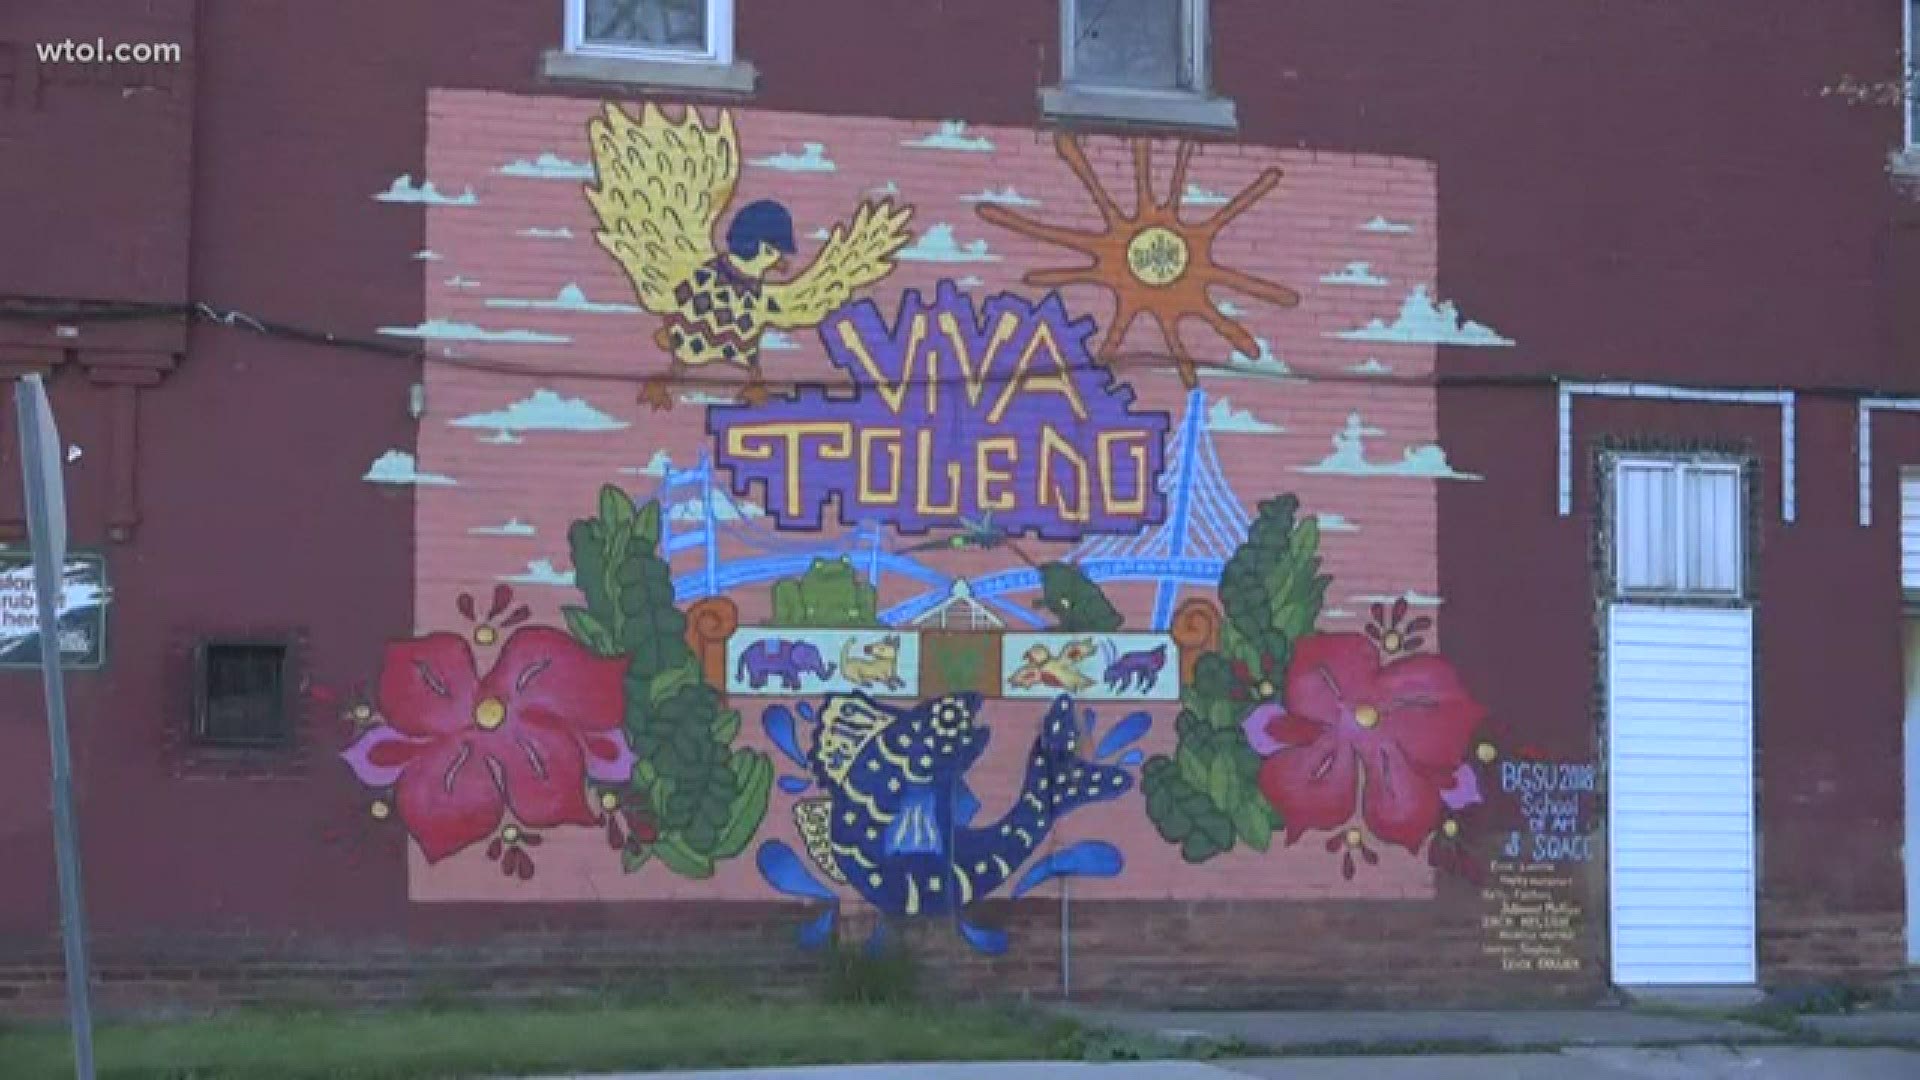 Because right now, we need it: The Latin art and murals of Old South End in Toledo, captured by WTOL 11 reporter Roxanne Elias.